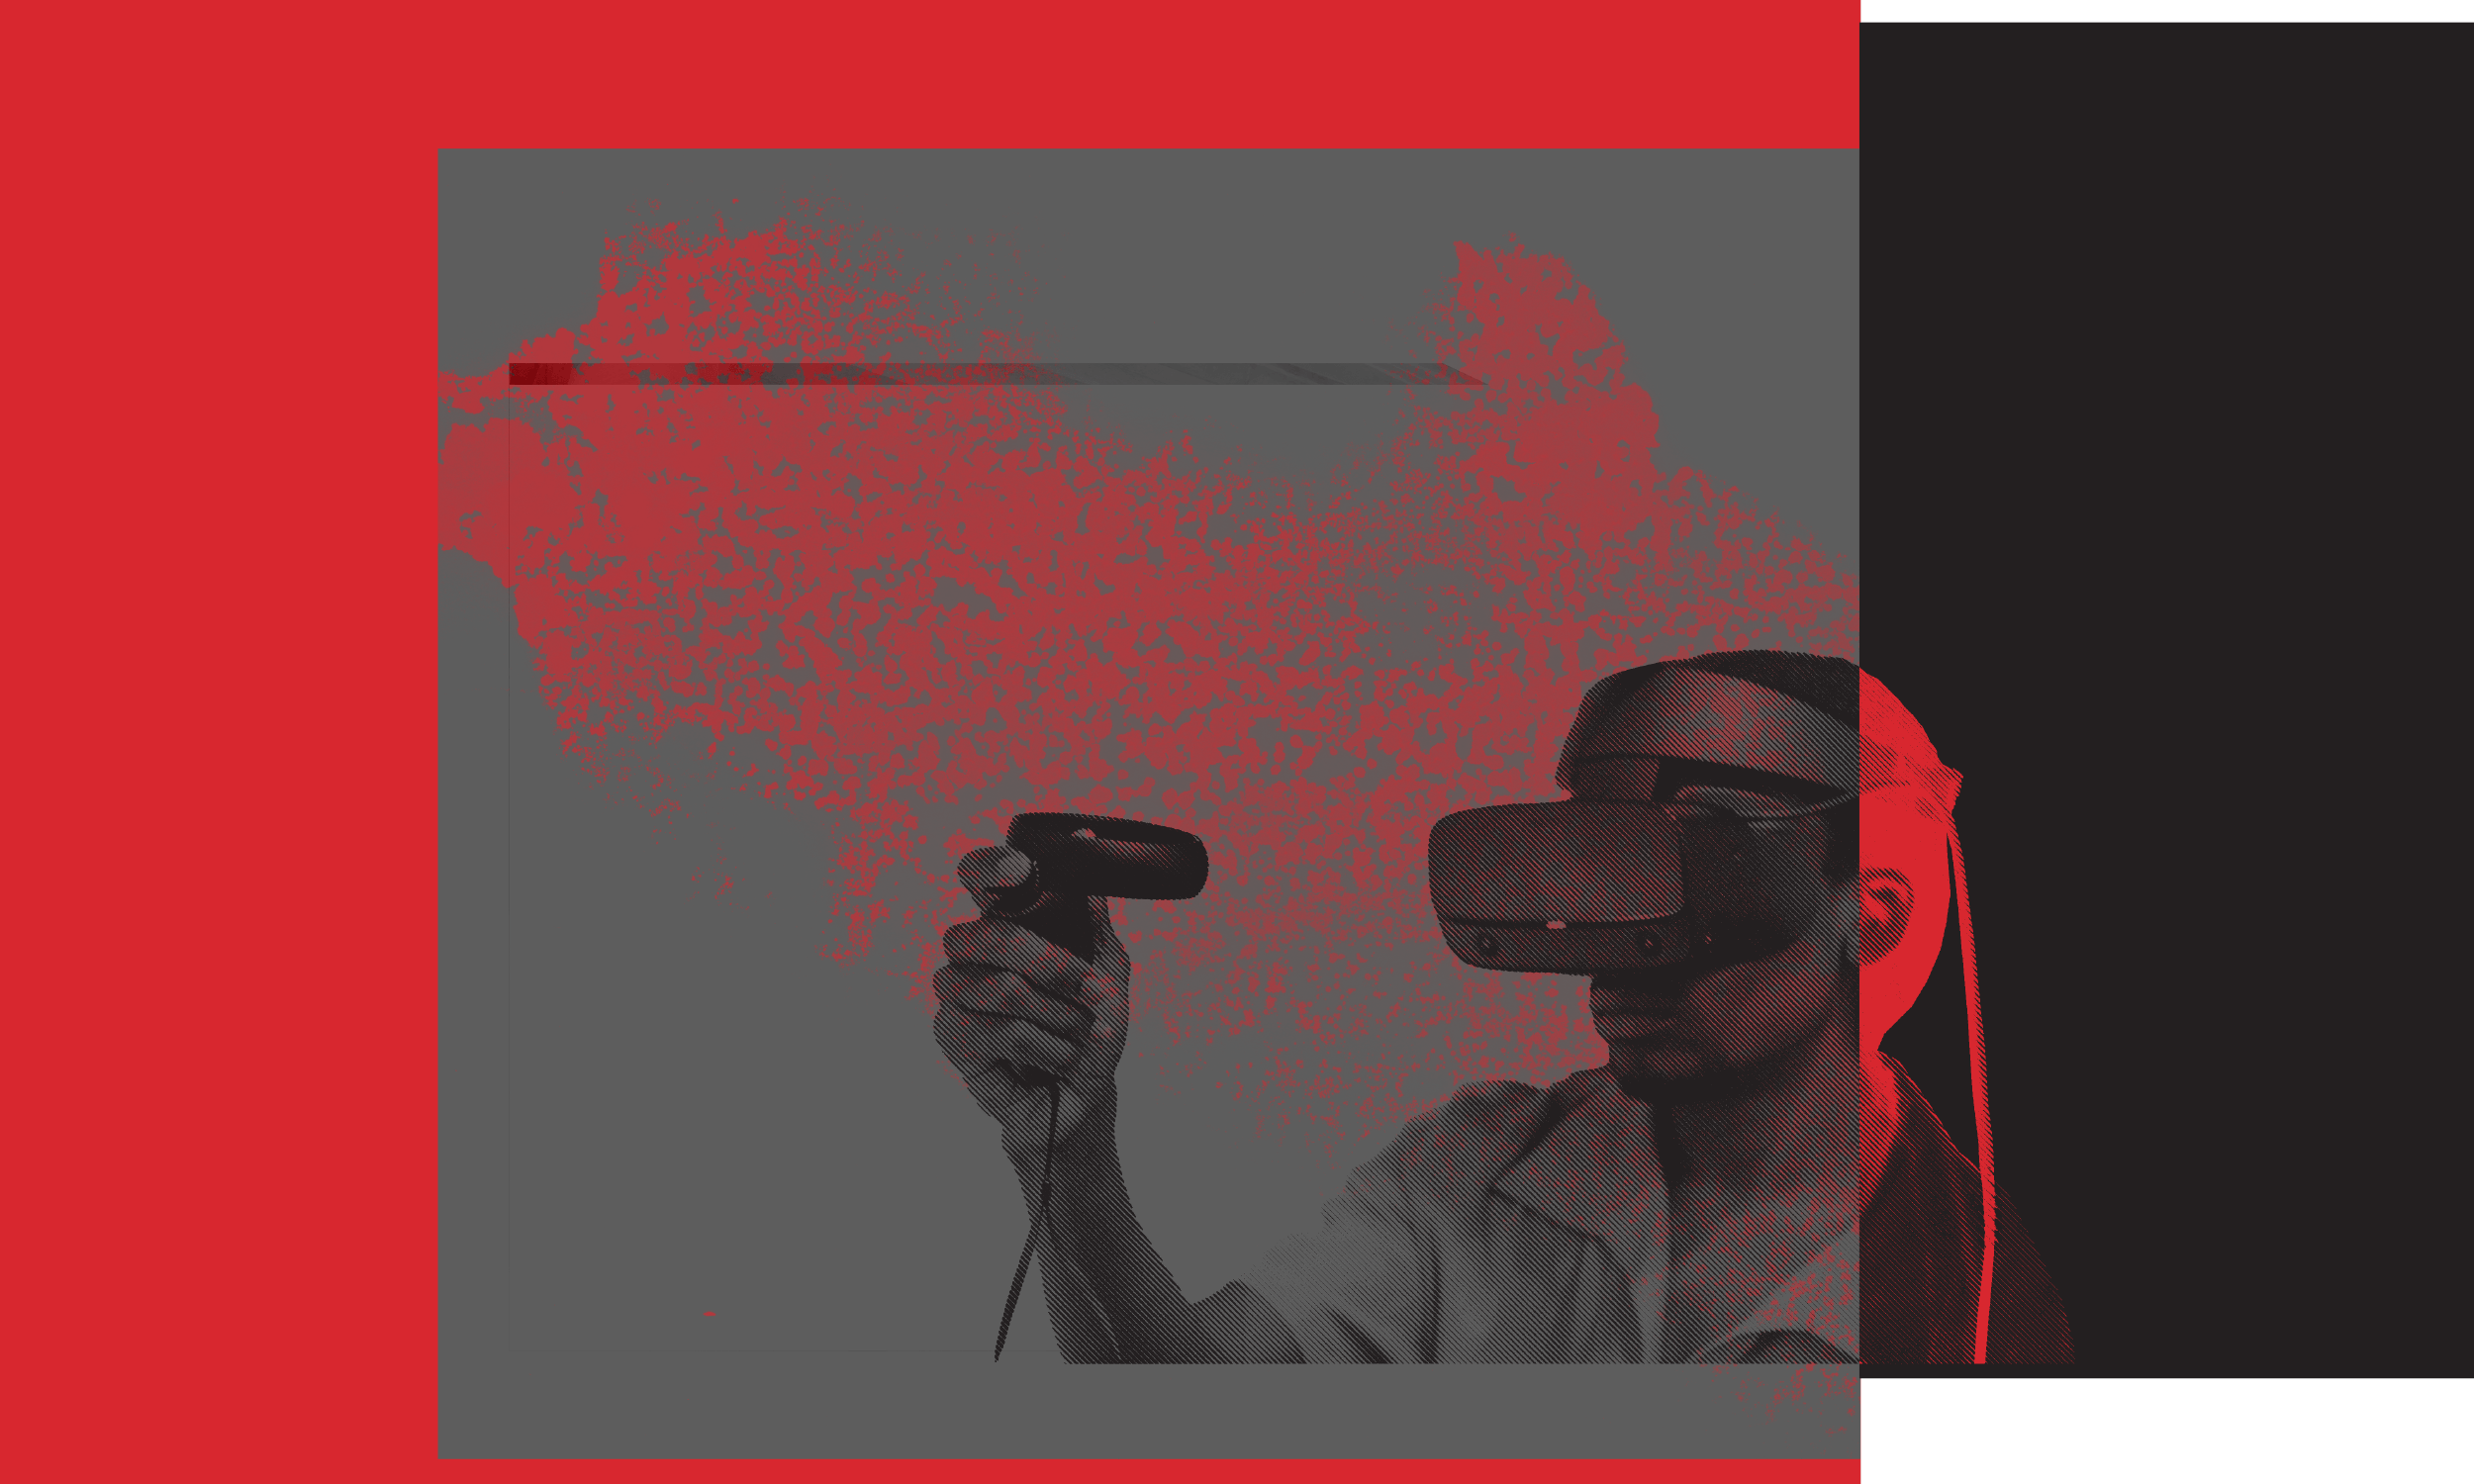 A graphic image of a student using VR technology. The image is treated with black, red and grey saturation.